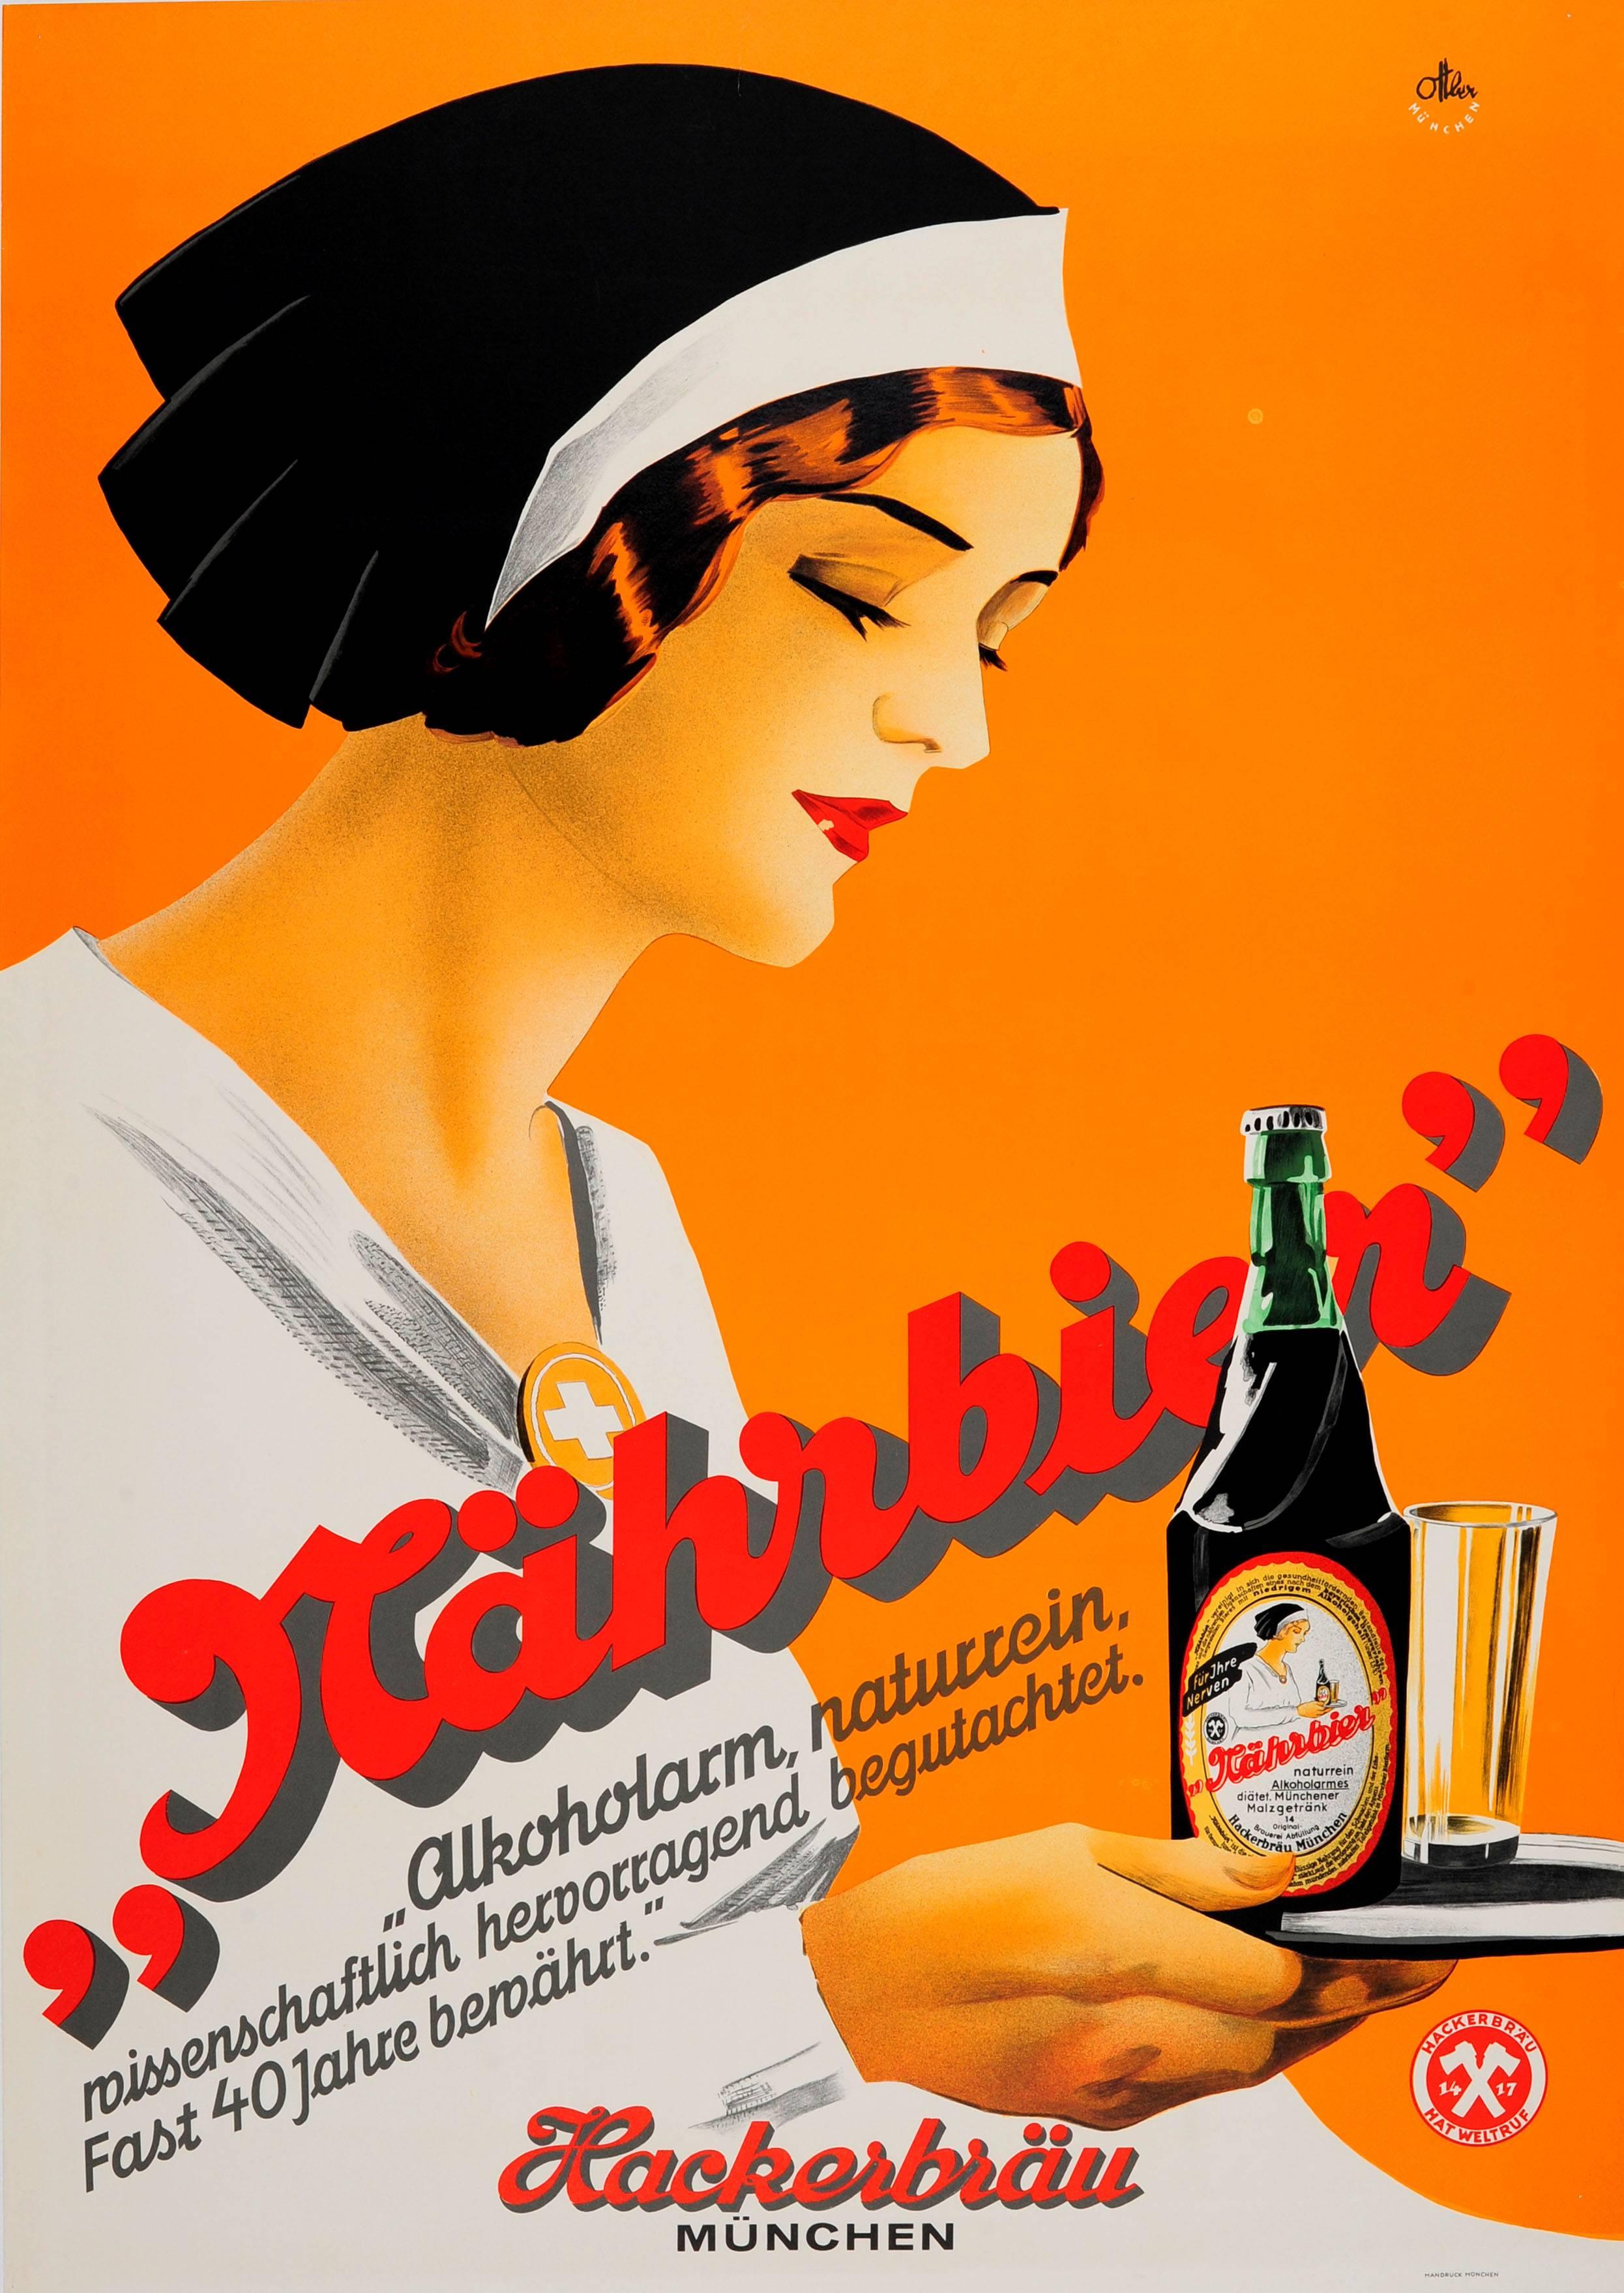 Otto Ottler Print - Original 1930s Art Deco Advertising Poster For The Hackerbrau Brewery In Munich